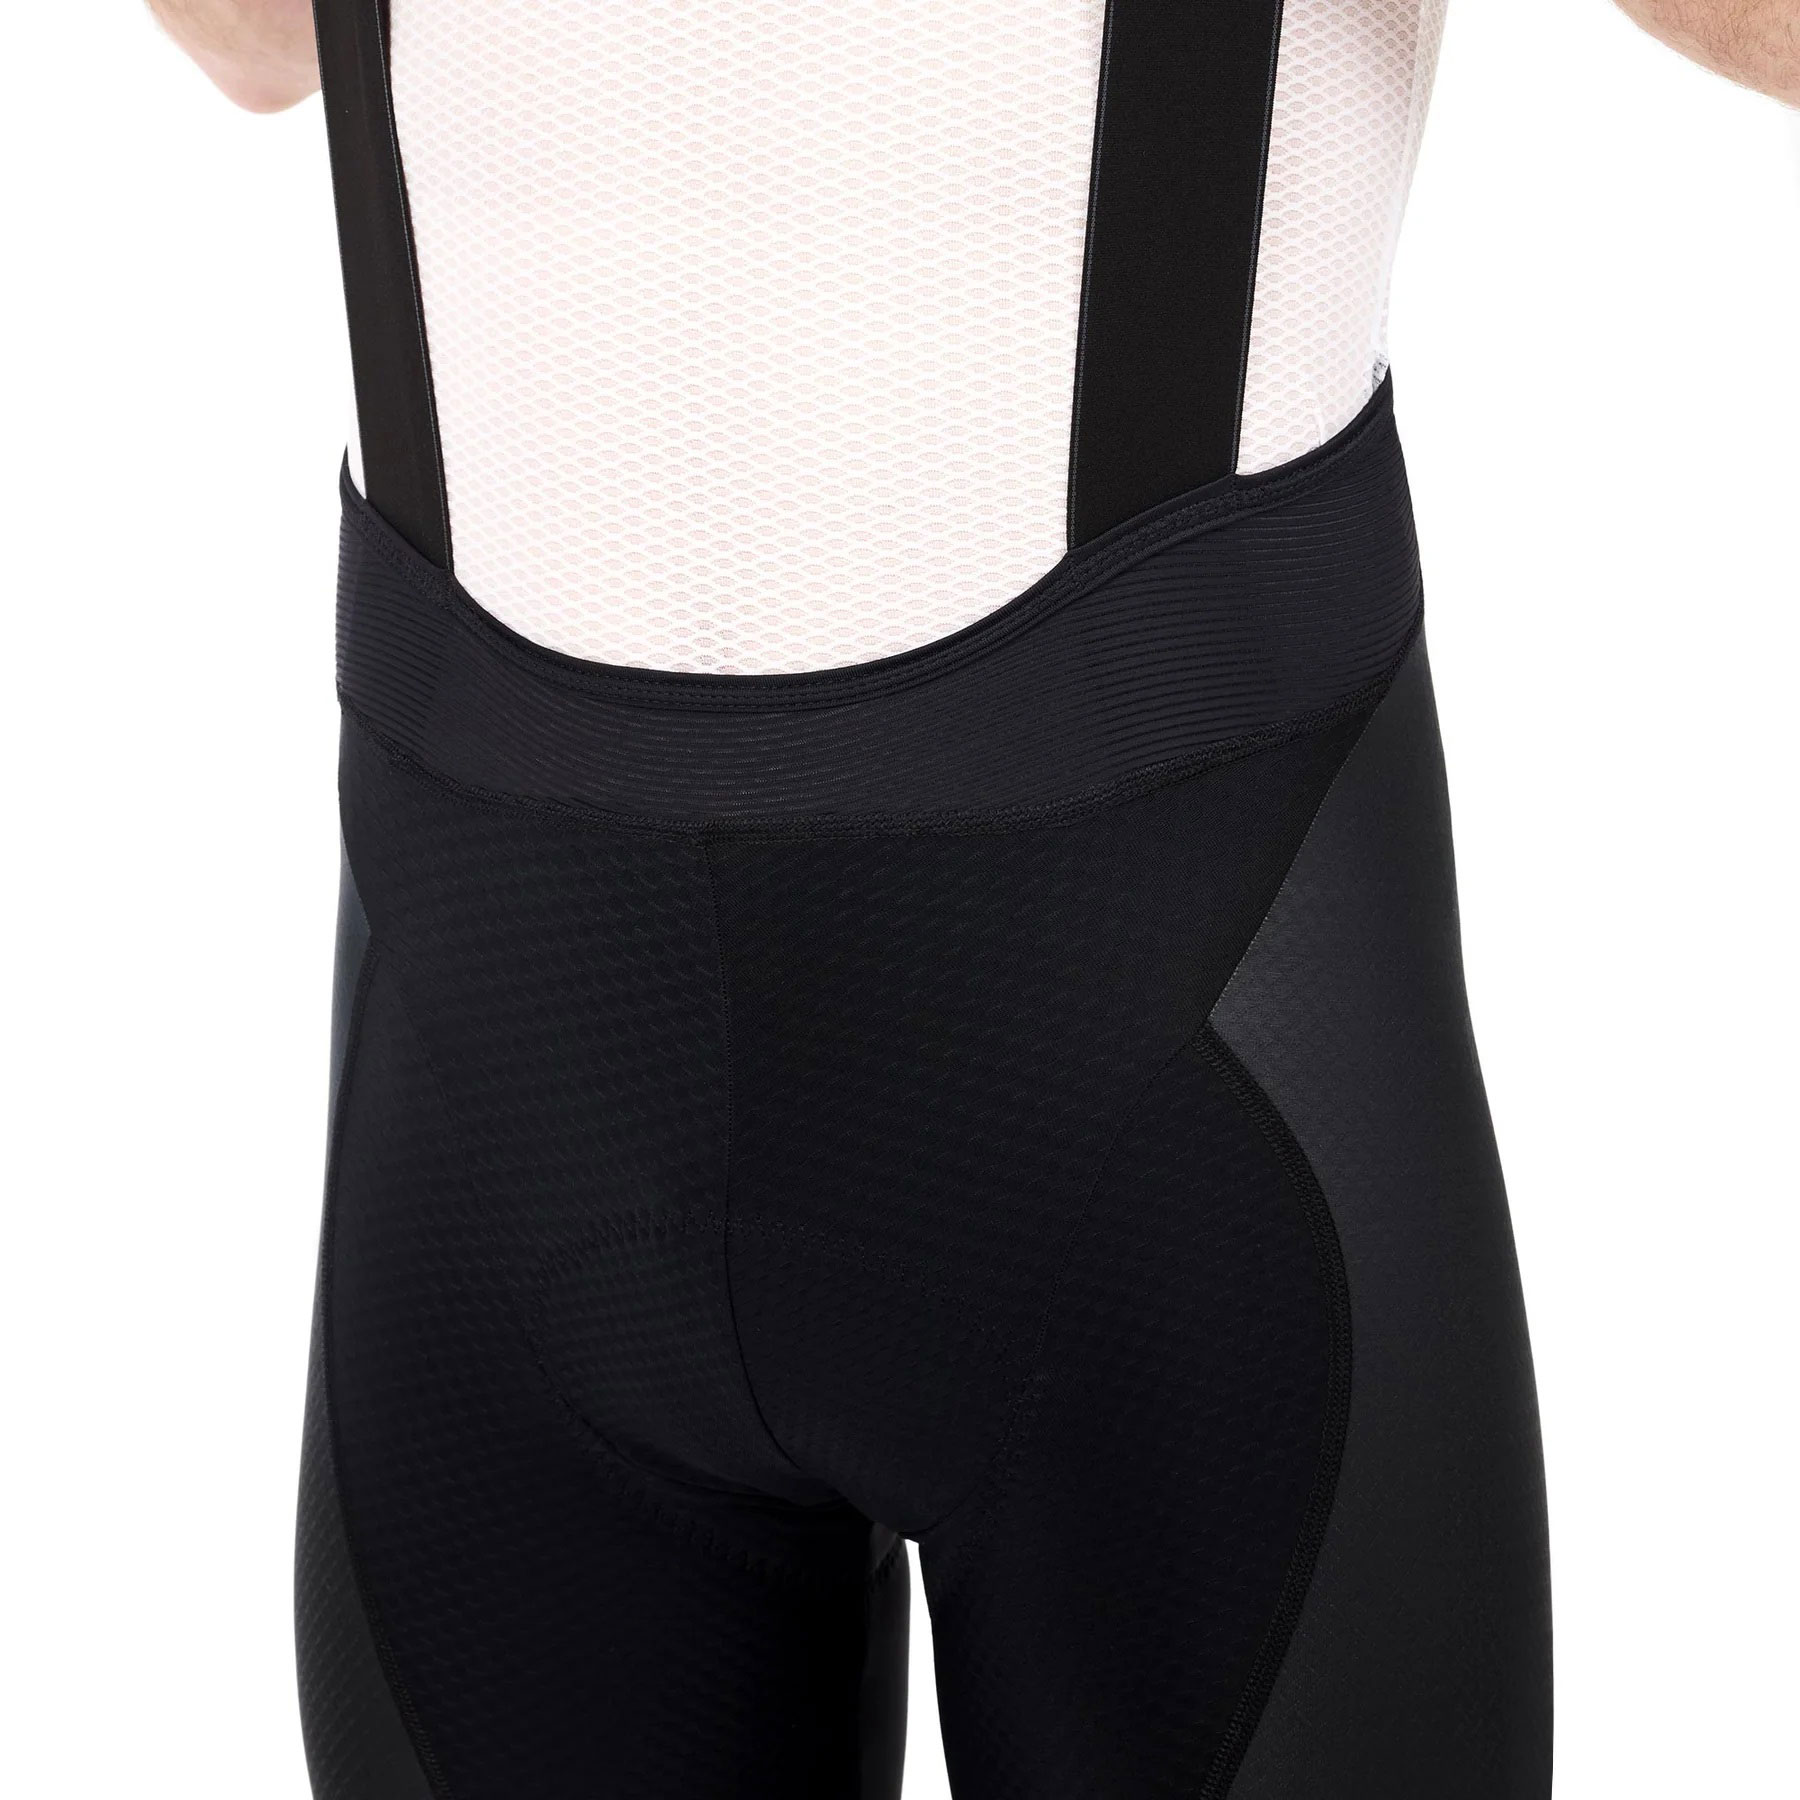 Culote Hombre Gobik Absolute 5.0 K10 Black, Maillot